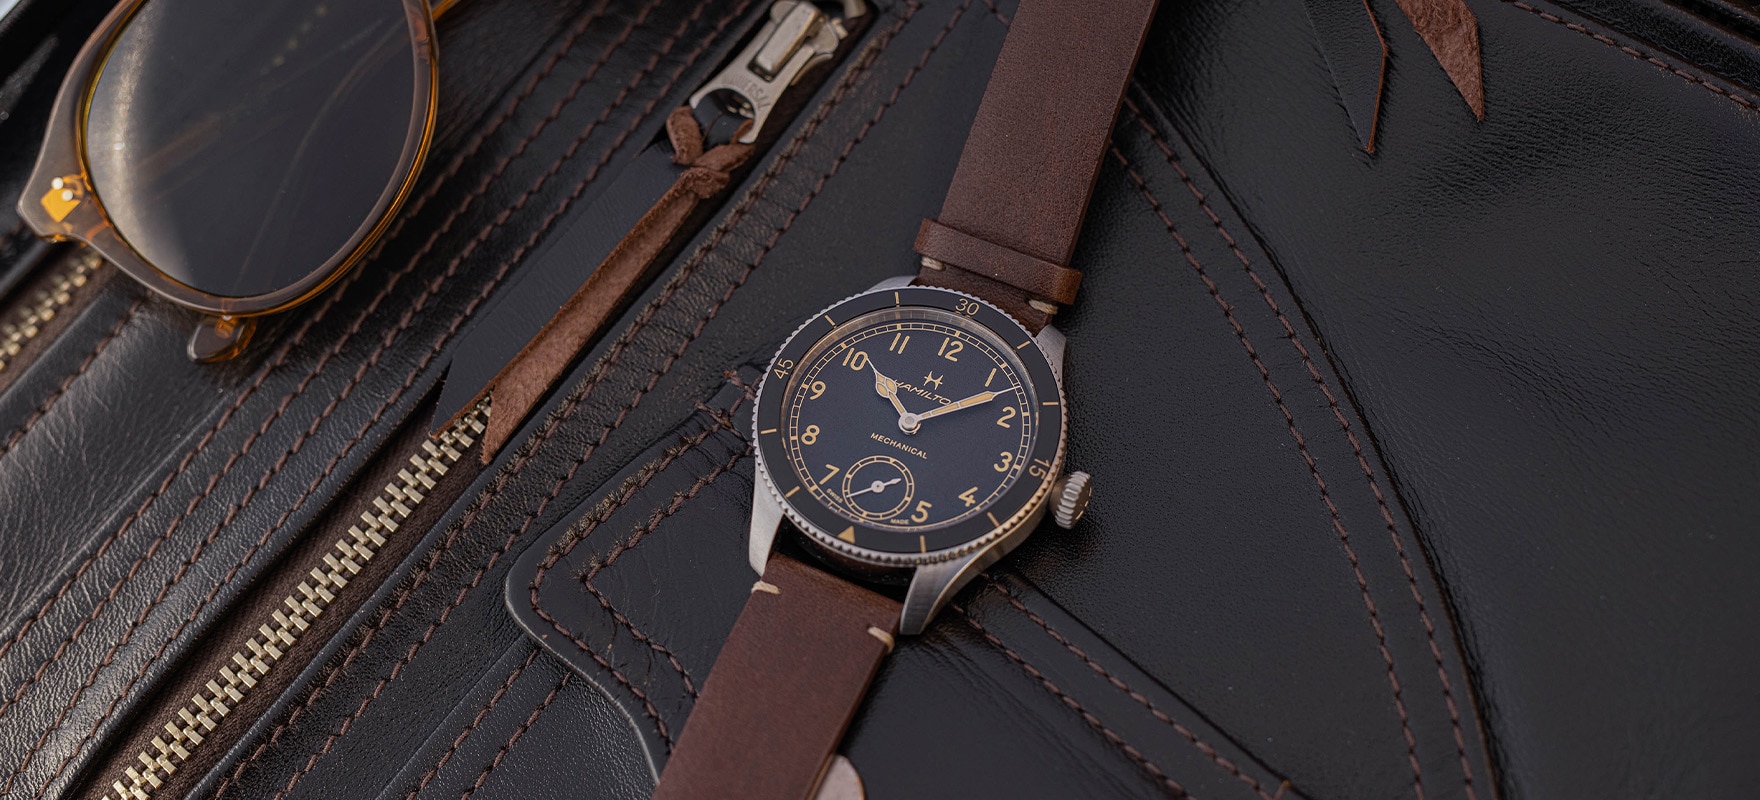 Hamilton Watch - Superior Engineering in a Classic Pilot Watch 